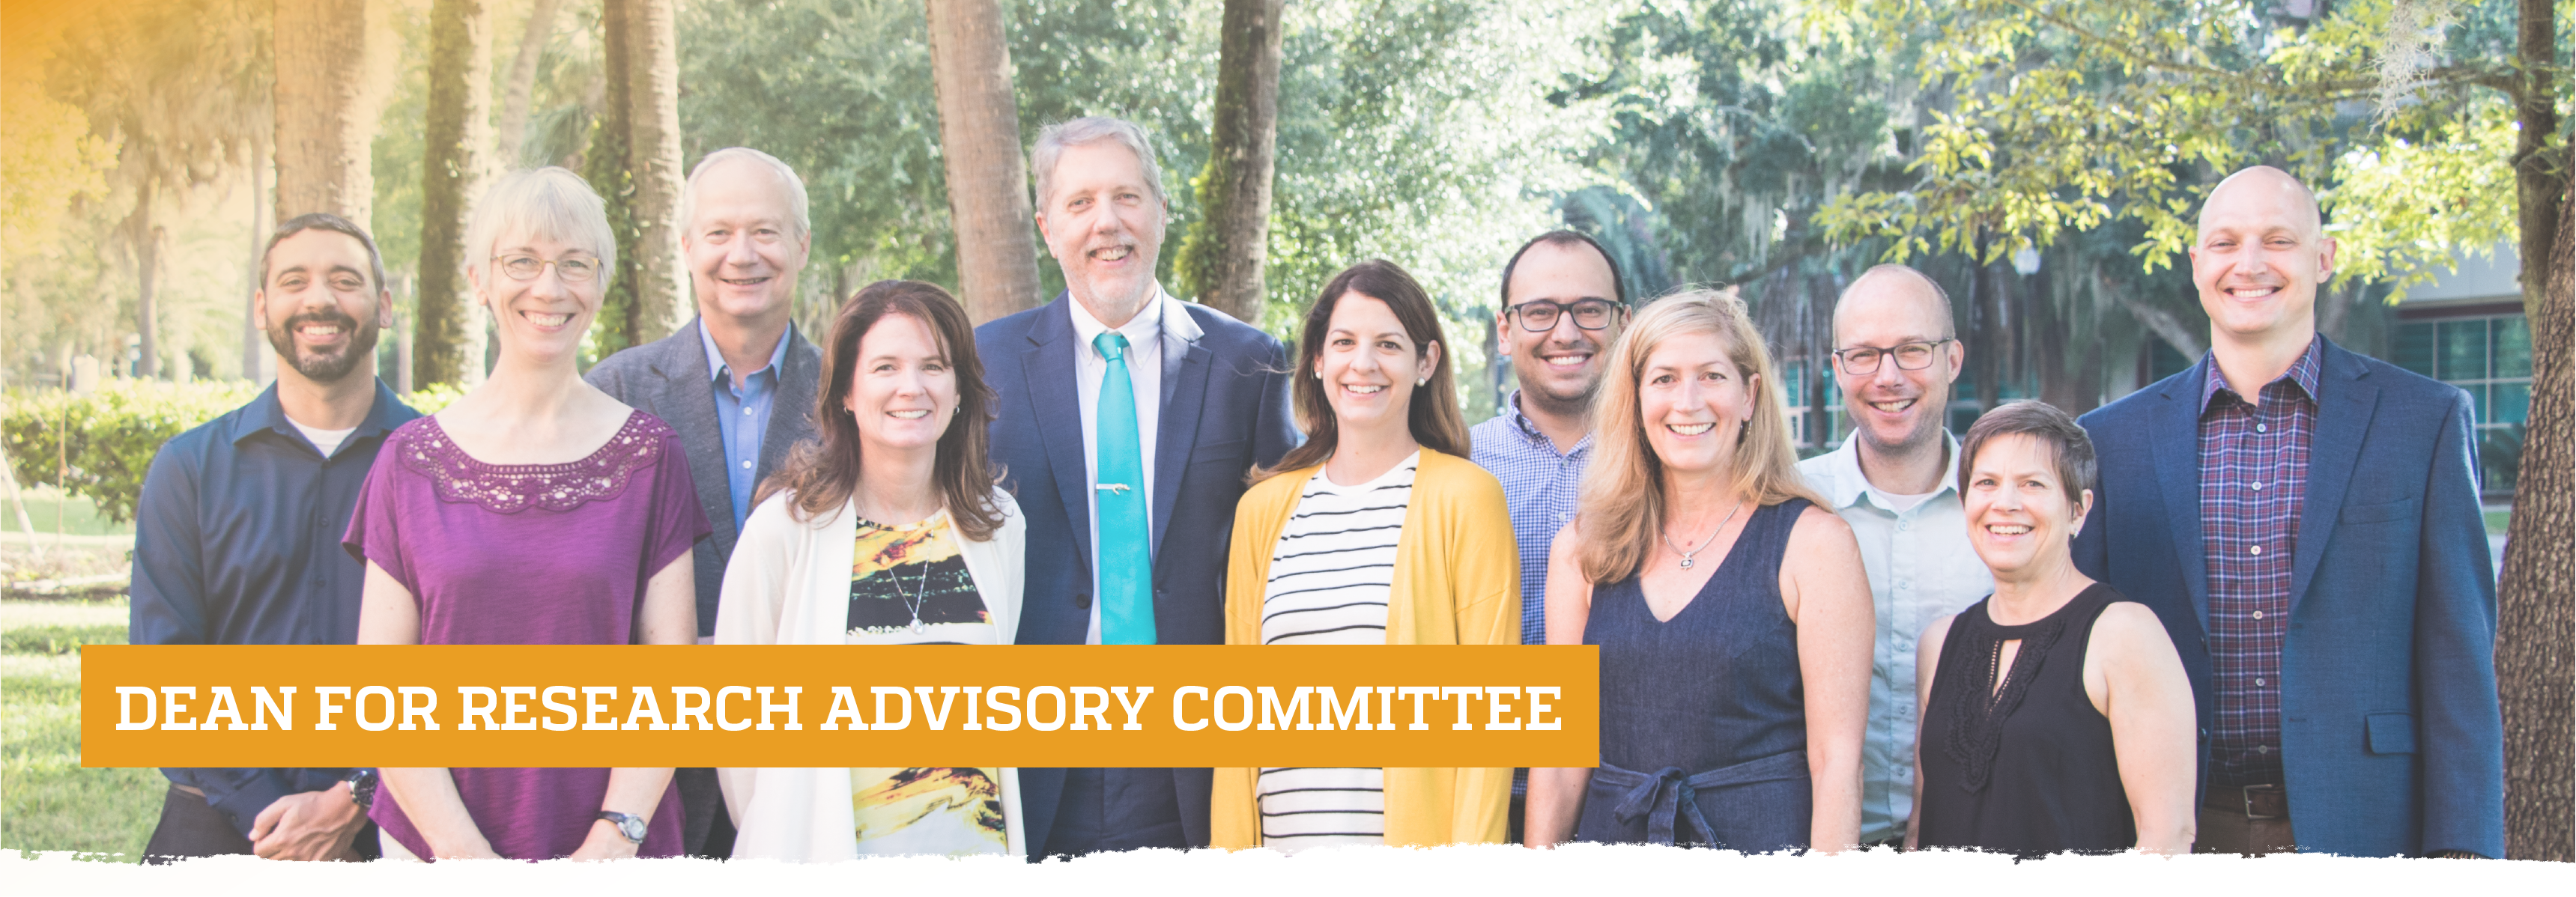 Dean for Research Advisory Committee